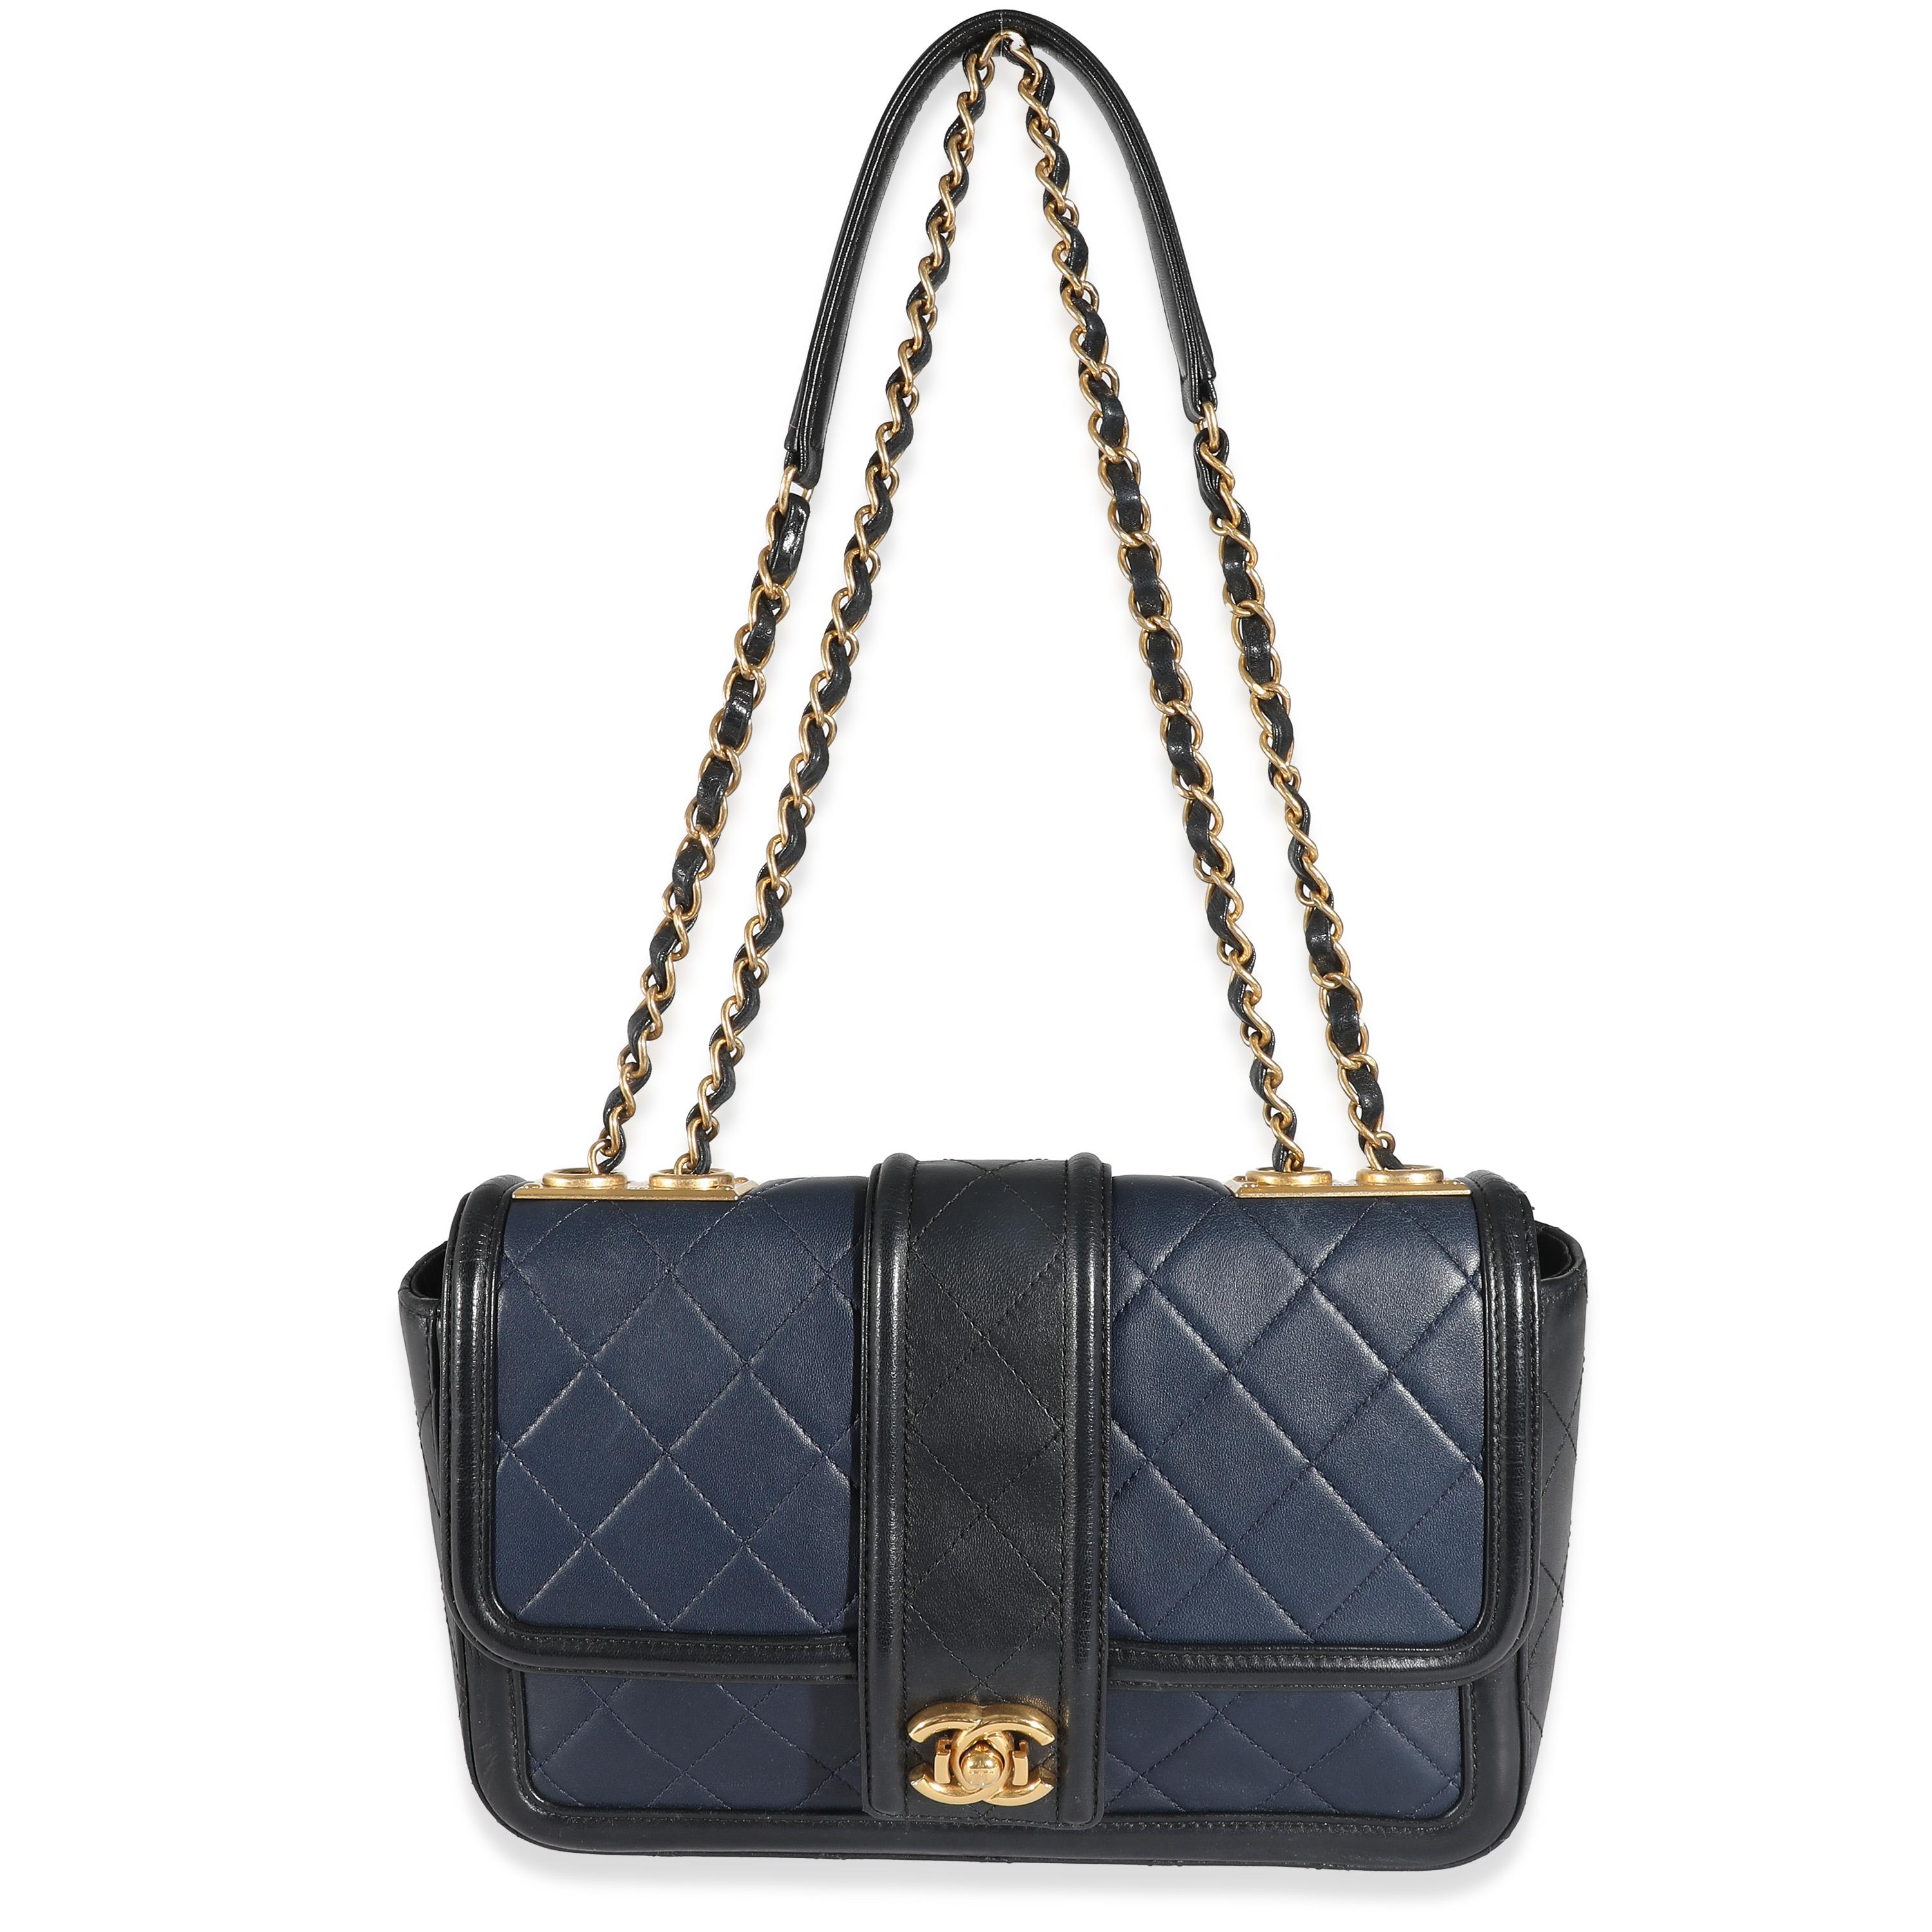 Chanel Navy Black Quilted Lambskin Medium Elegant CC Flap Bag In Excellent Condition For Sale In New York, NY